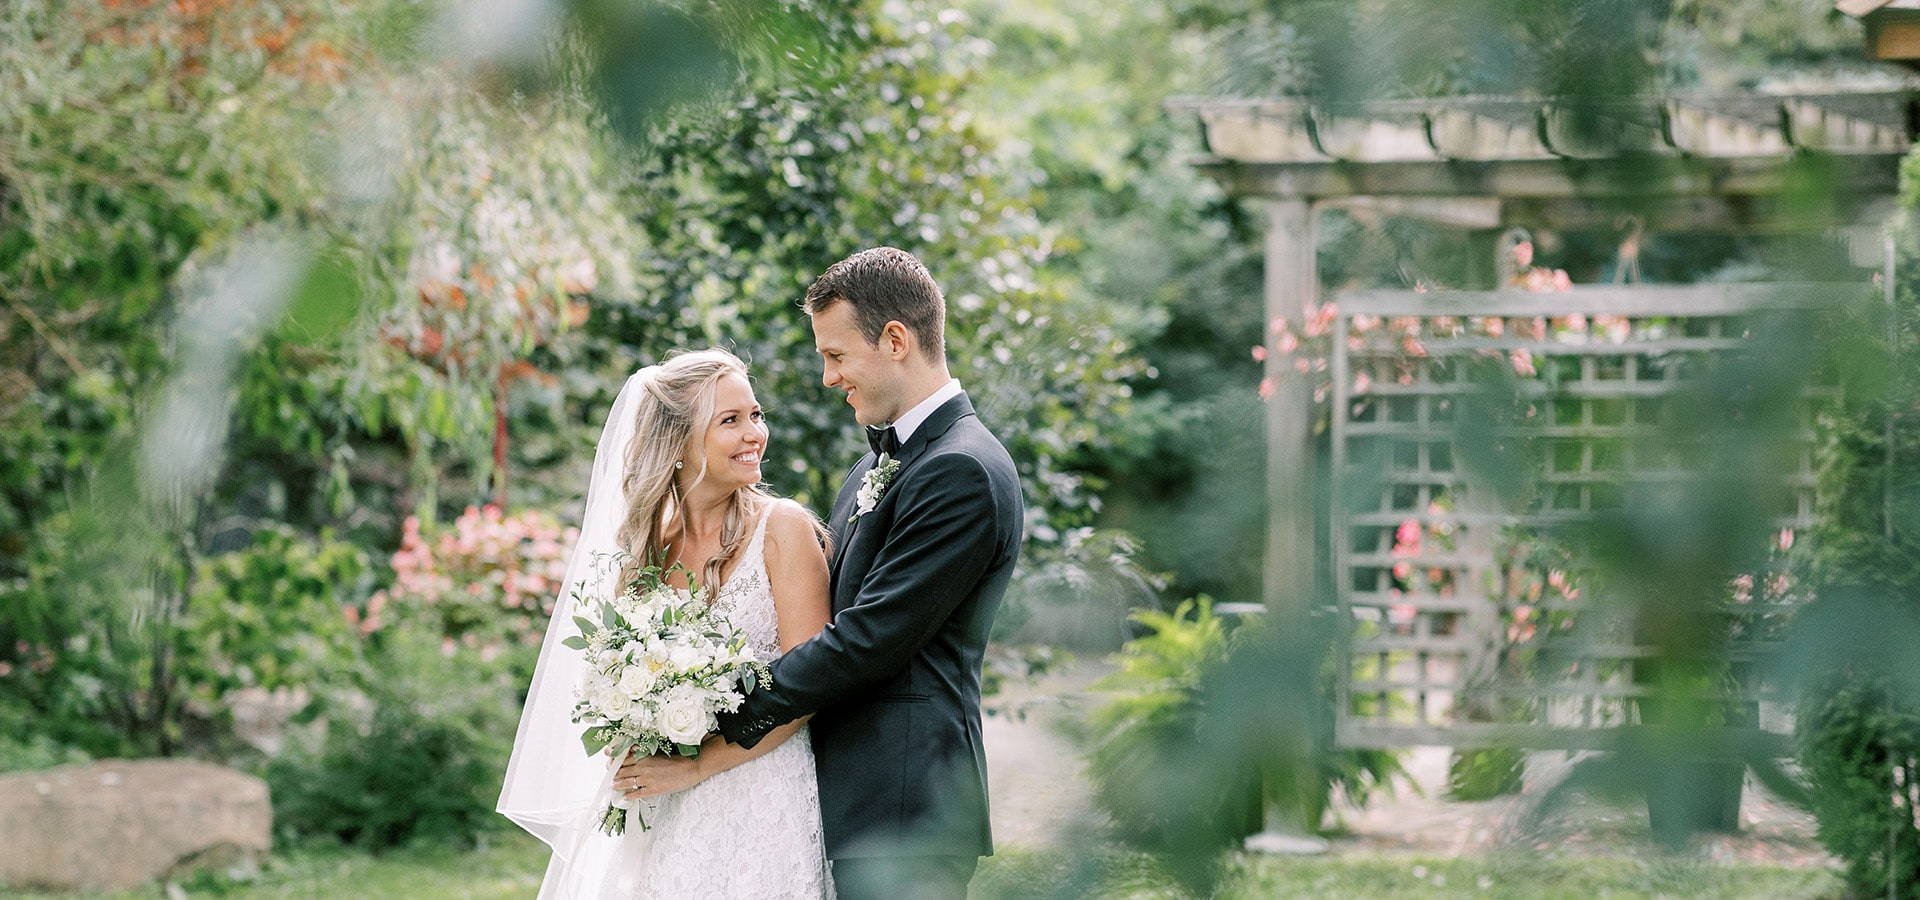 Hero image for Olivia and Colin’s Breathtaking Wedding at the Picturesque Madison Green House